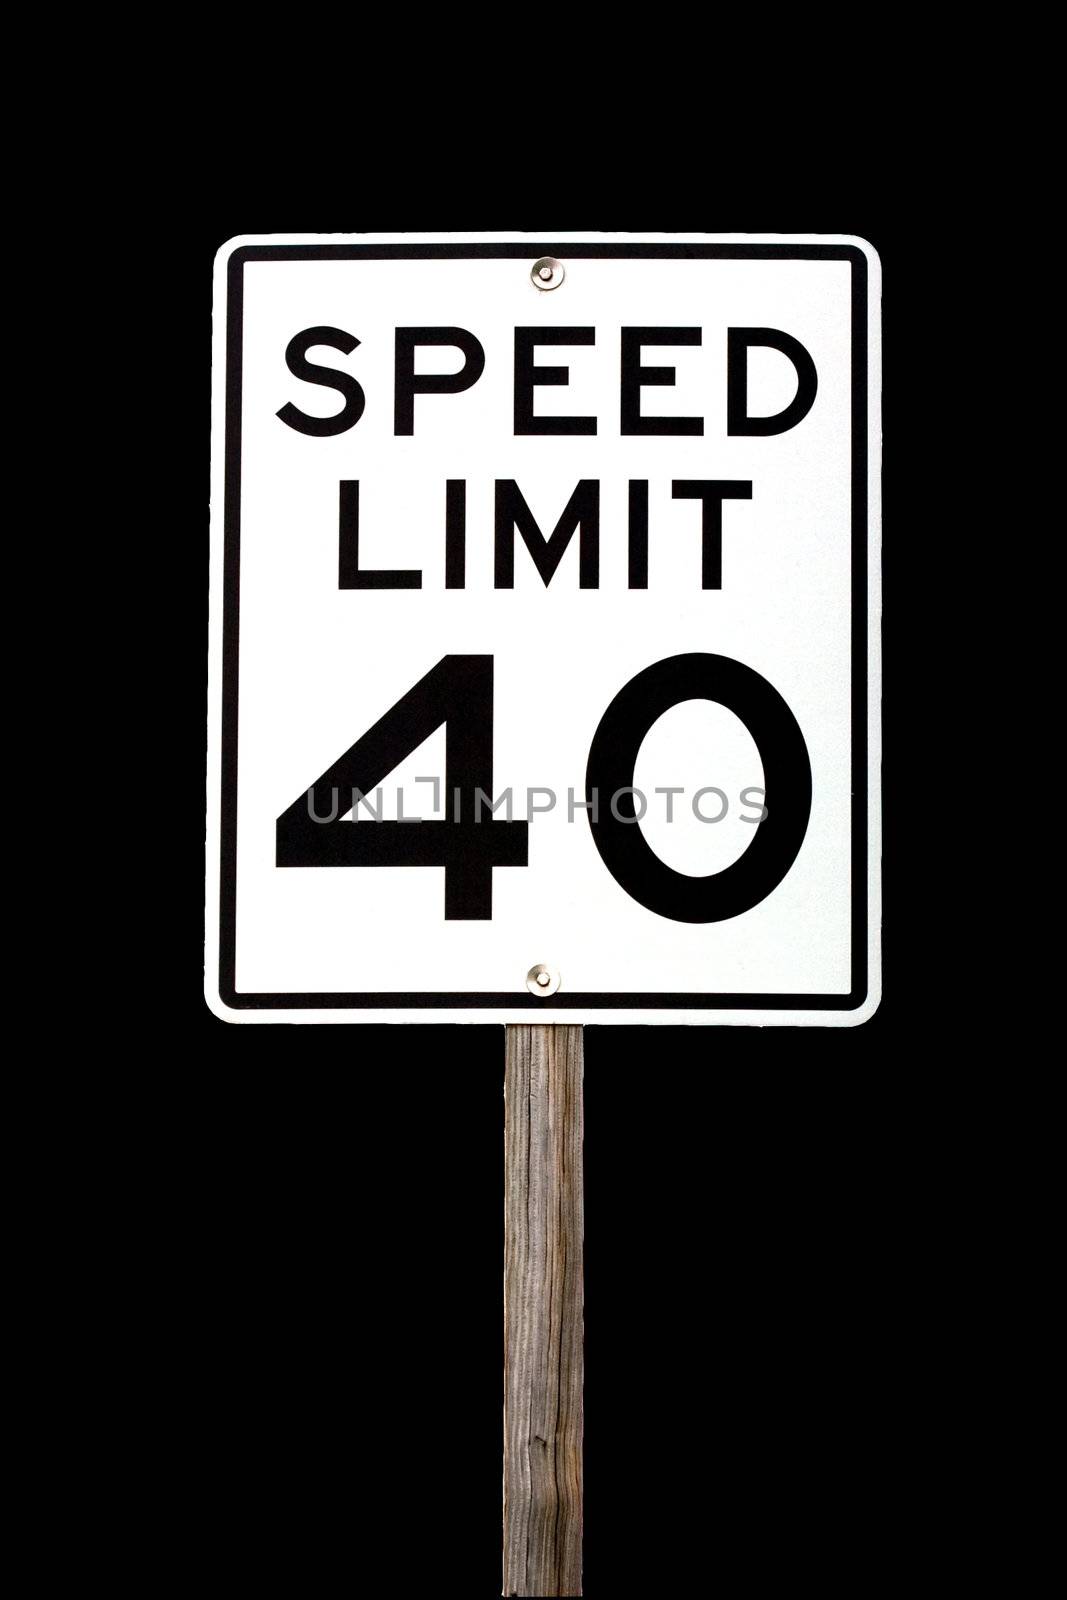 Simple country road speed limit sign